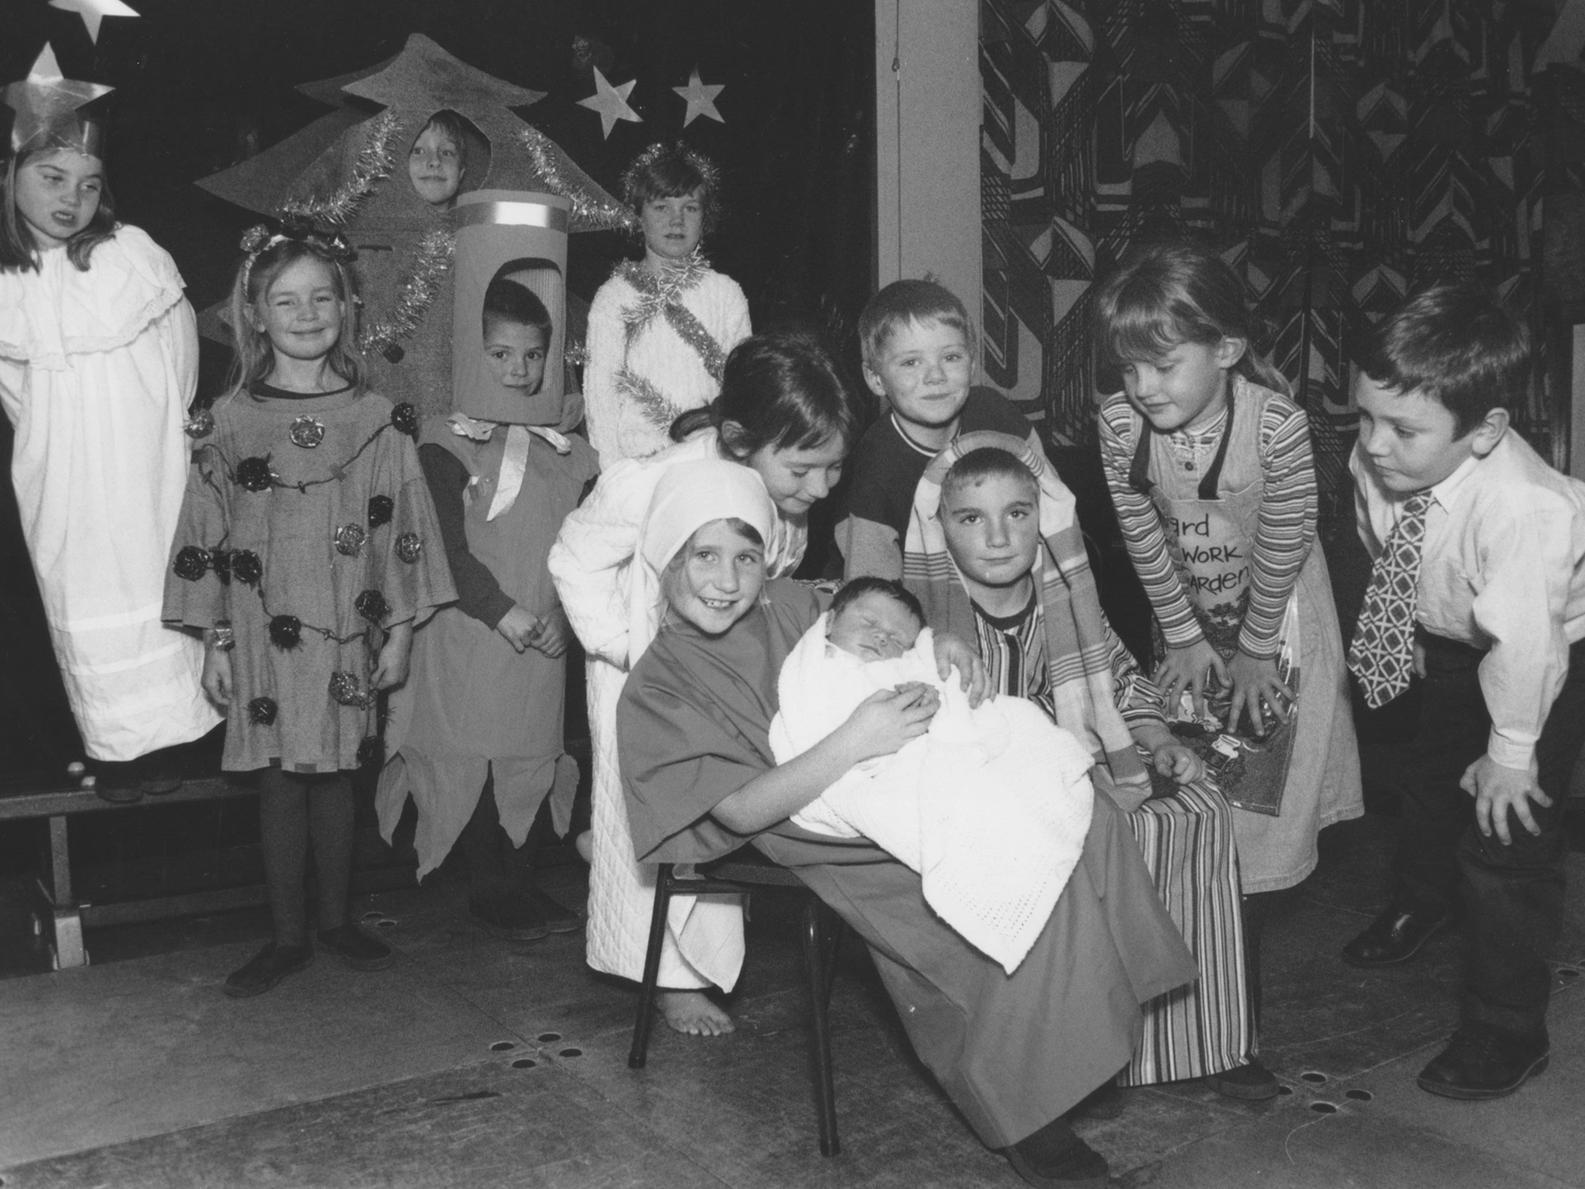 Here are the principal players from St Martin's School Nativity, who used a real baby for the part of Jesus in December 1997. Looking on are, back left to right, Hanna Neil, Tilly Smith, Peter Cowper, Philip Gilbank and Amy Wadsworth; middle row, Alice Hamp, Matthew Shimmin, Georgie Adams and Christopher Woodhouse; front, Holli-Marie Goodlad as Mary, her brother Benjamin Goodlad as baby Jesus, and Luke Emmerson who played Joseph.